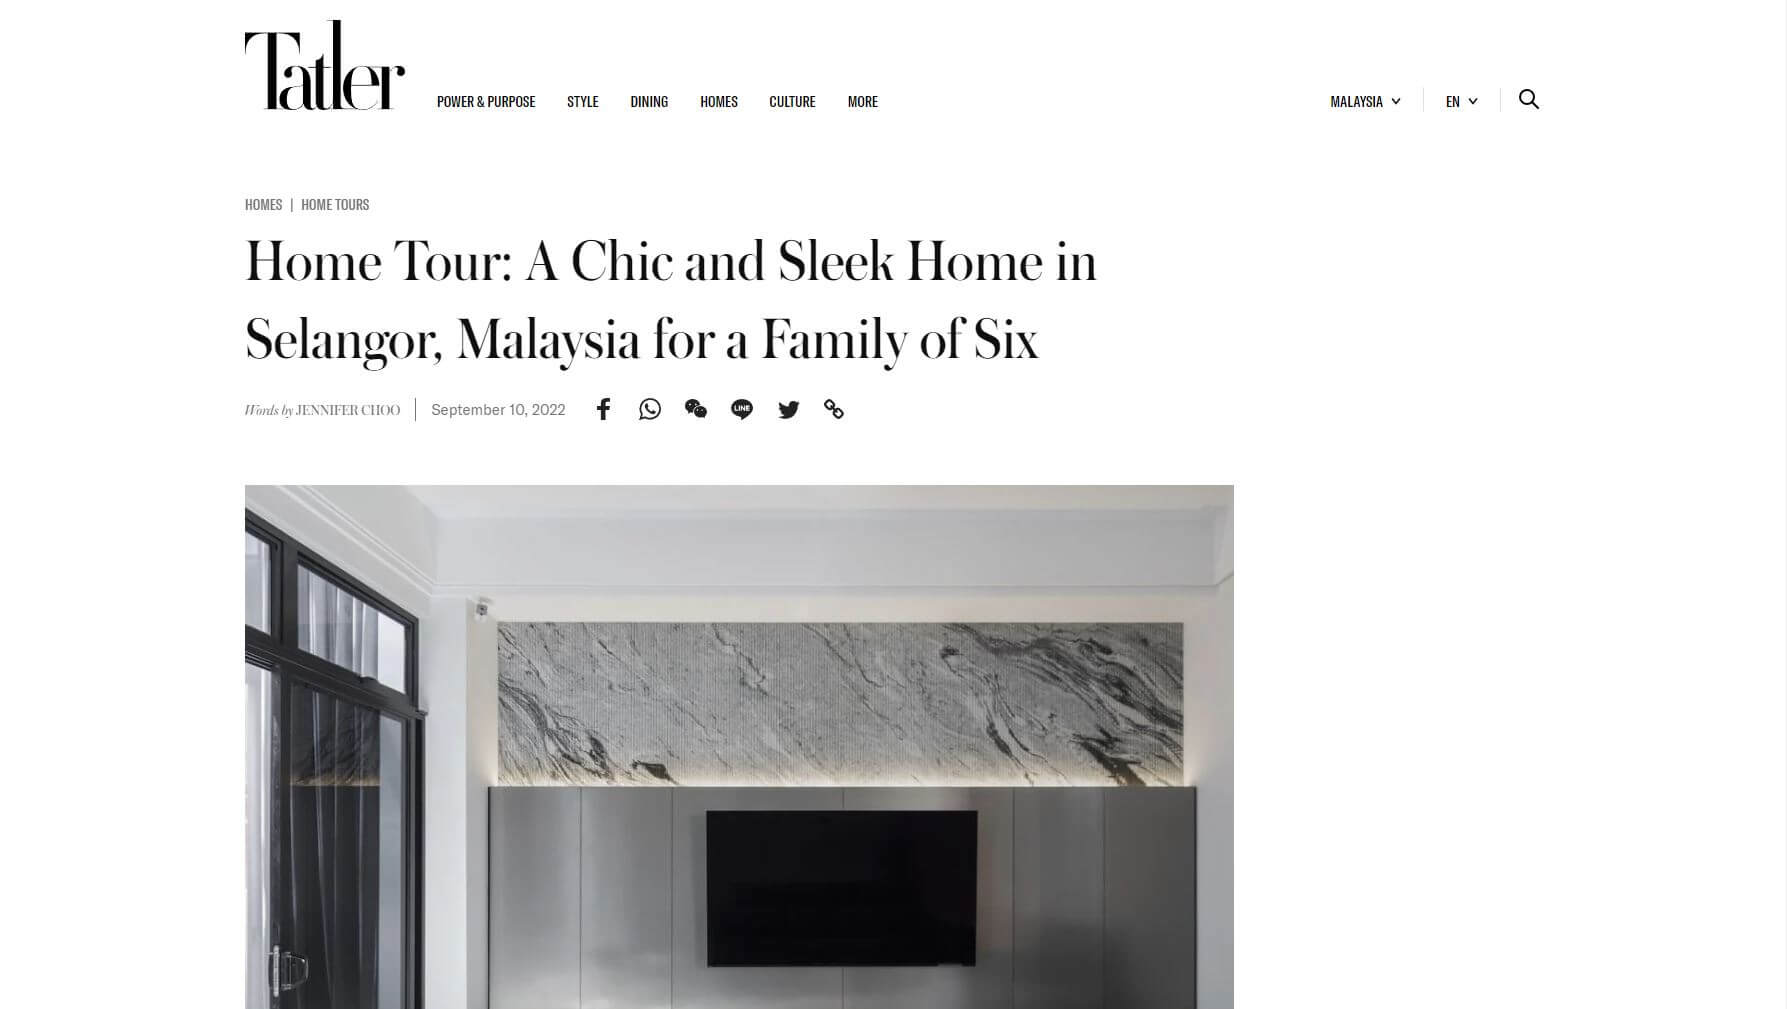 Home Tour: A Chic and Sleek Home in Selangor, Malaysia for a Family of Six, 10 September 2022